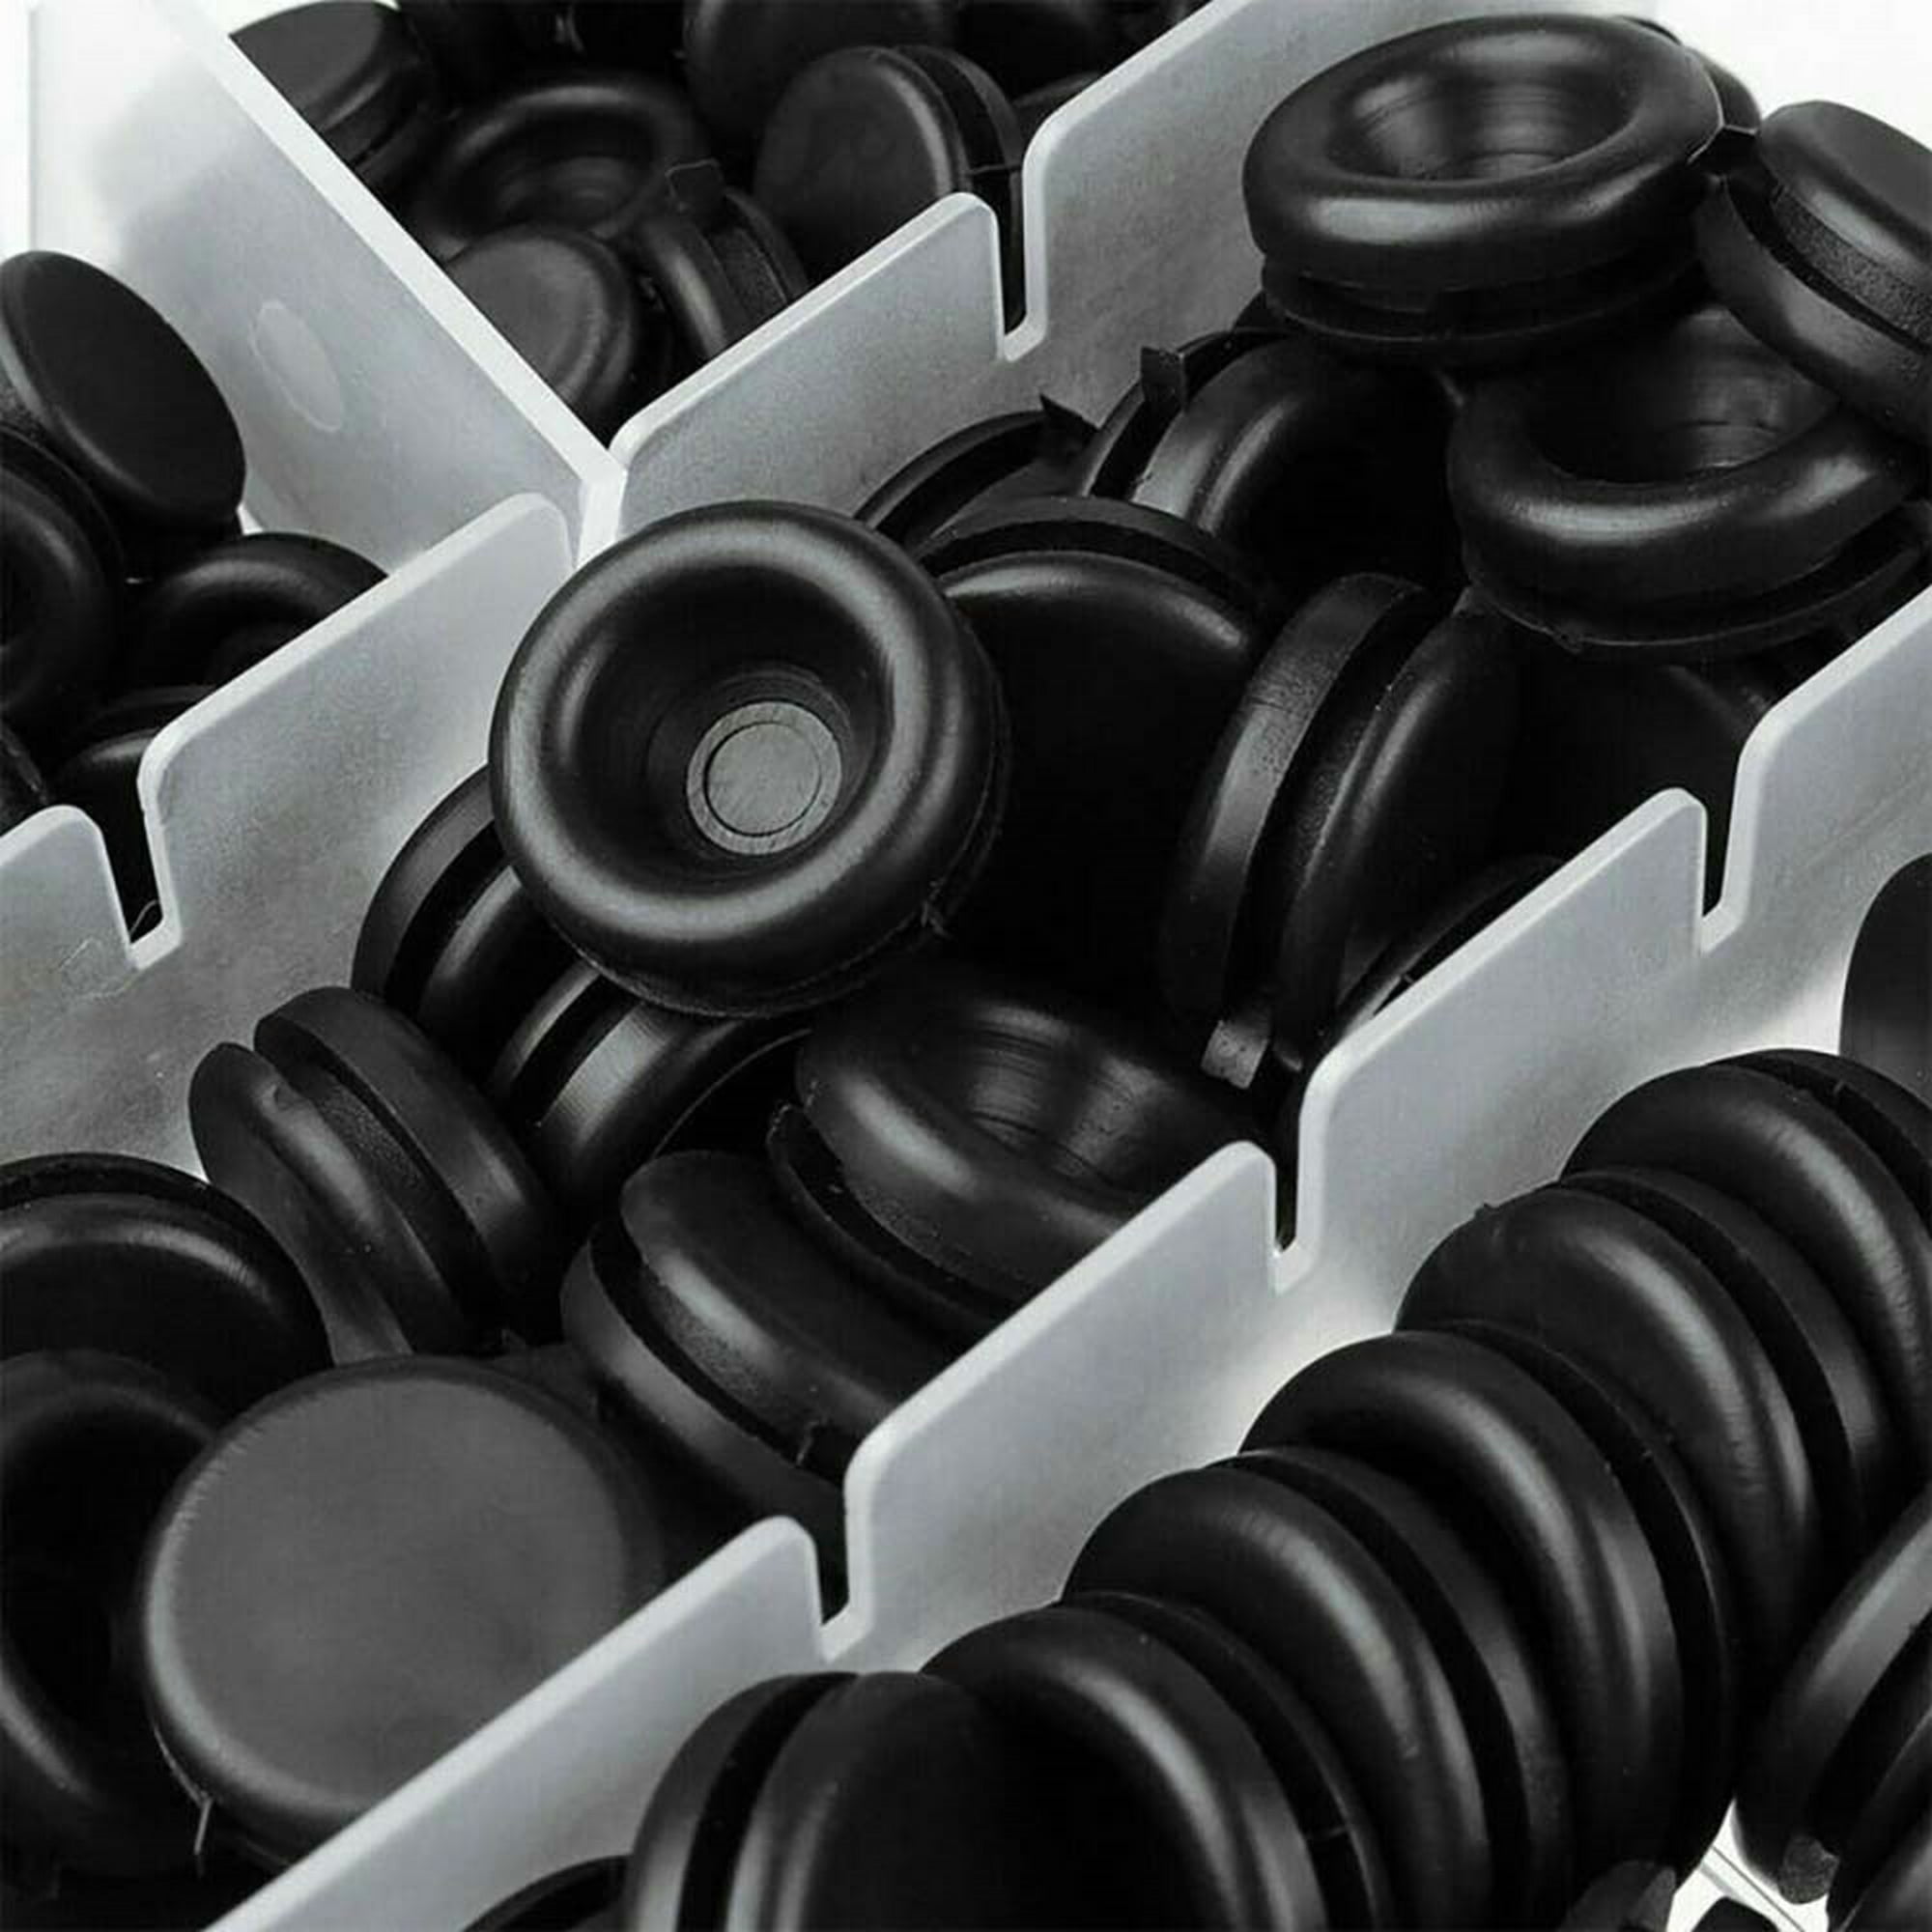 170Pcs Assorted Rubber Blanking Grommets Kit Open/Closed Blind Bung Plug Wiring.